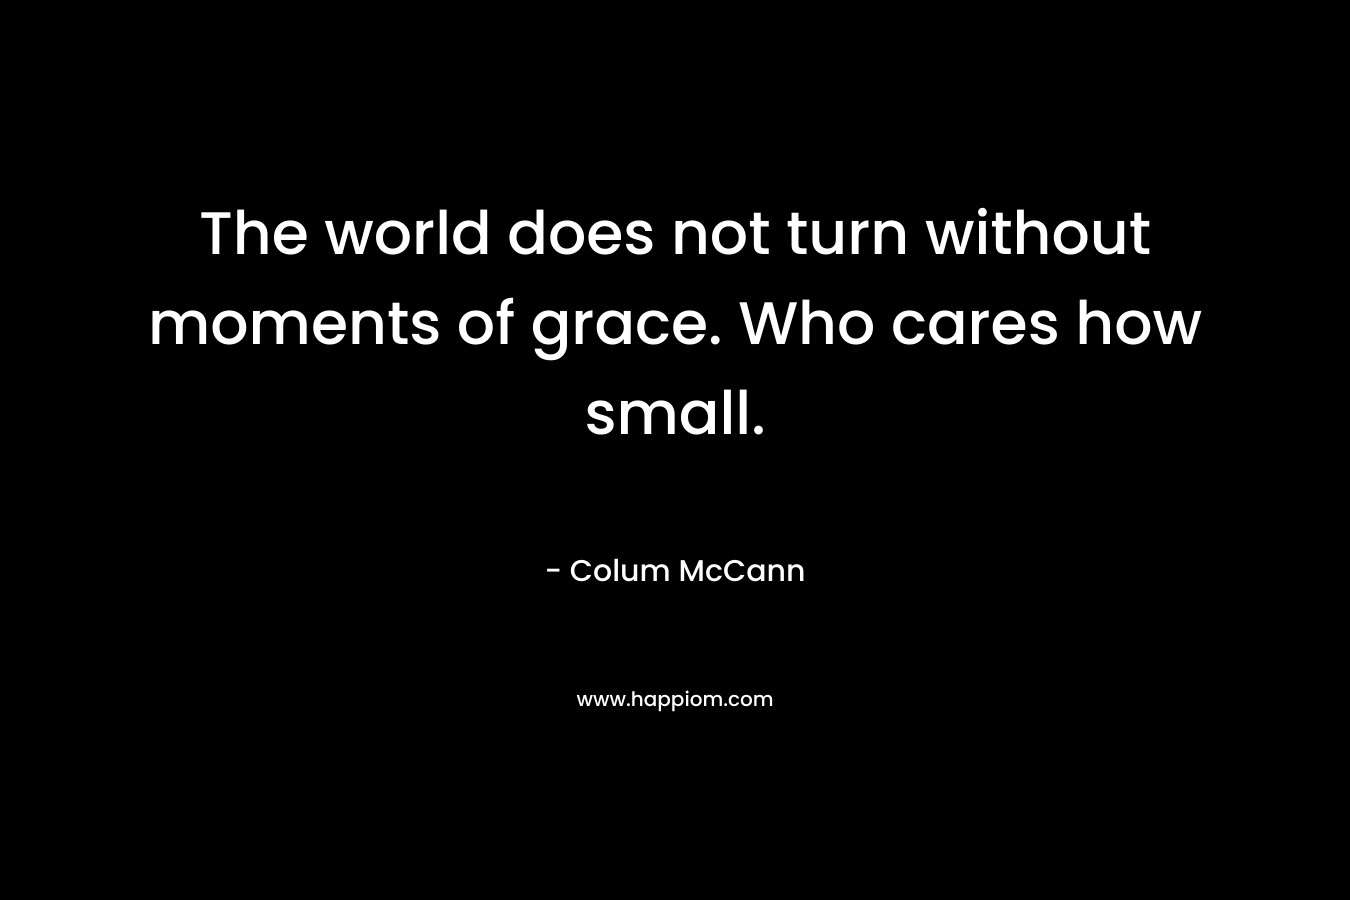 The world does not turn without moments of grace. Who cares how small.